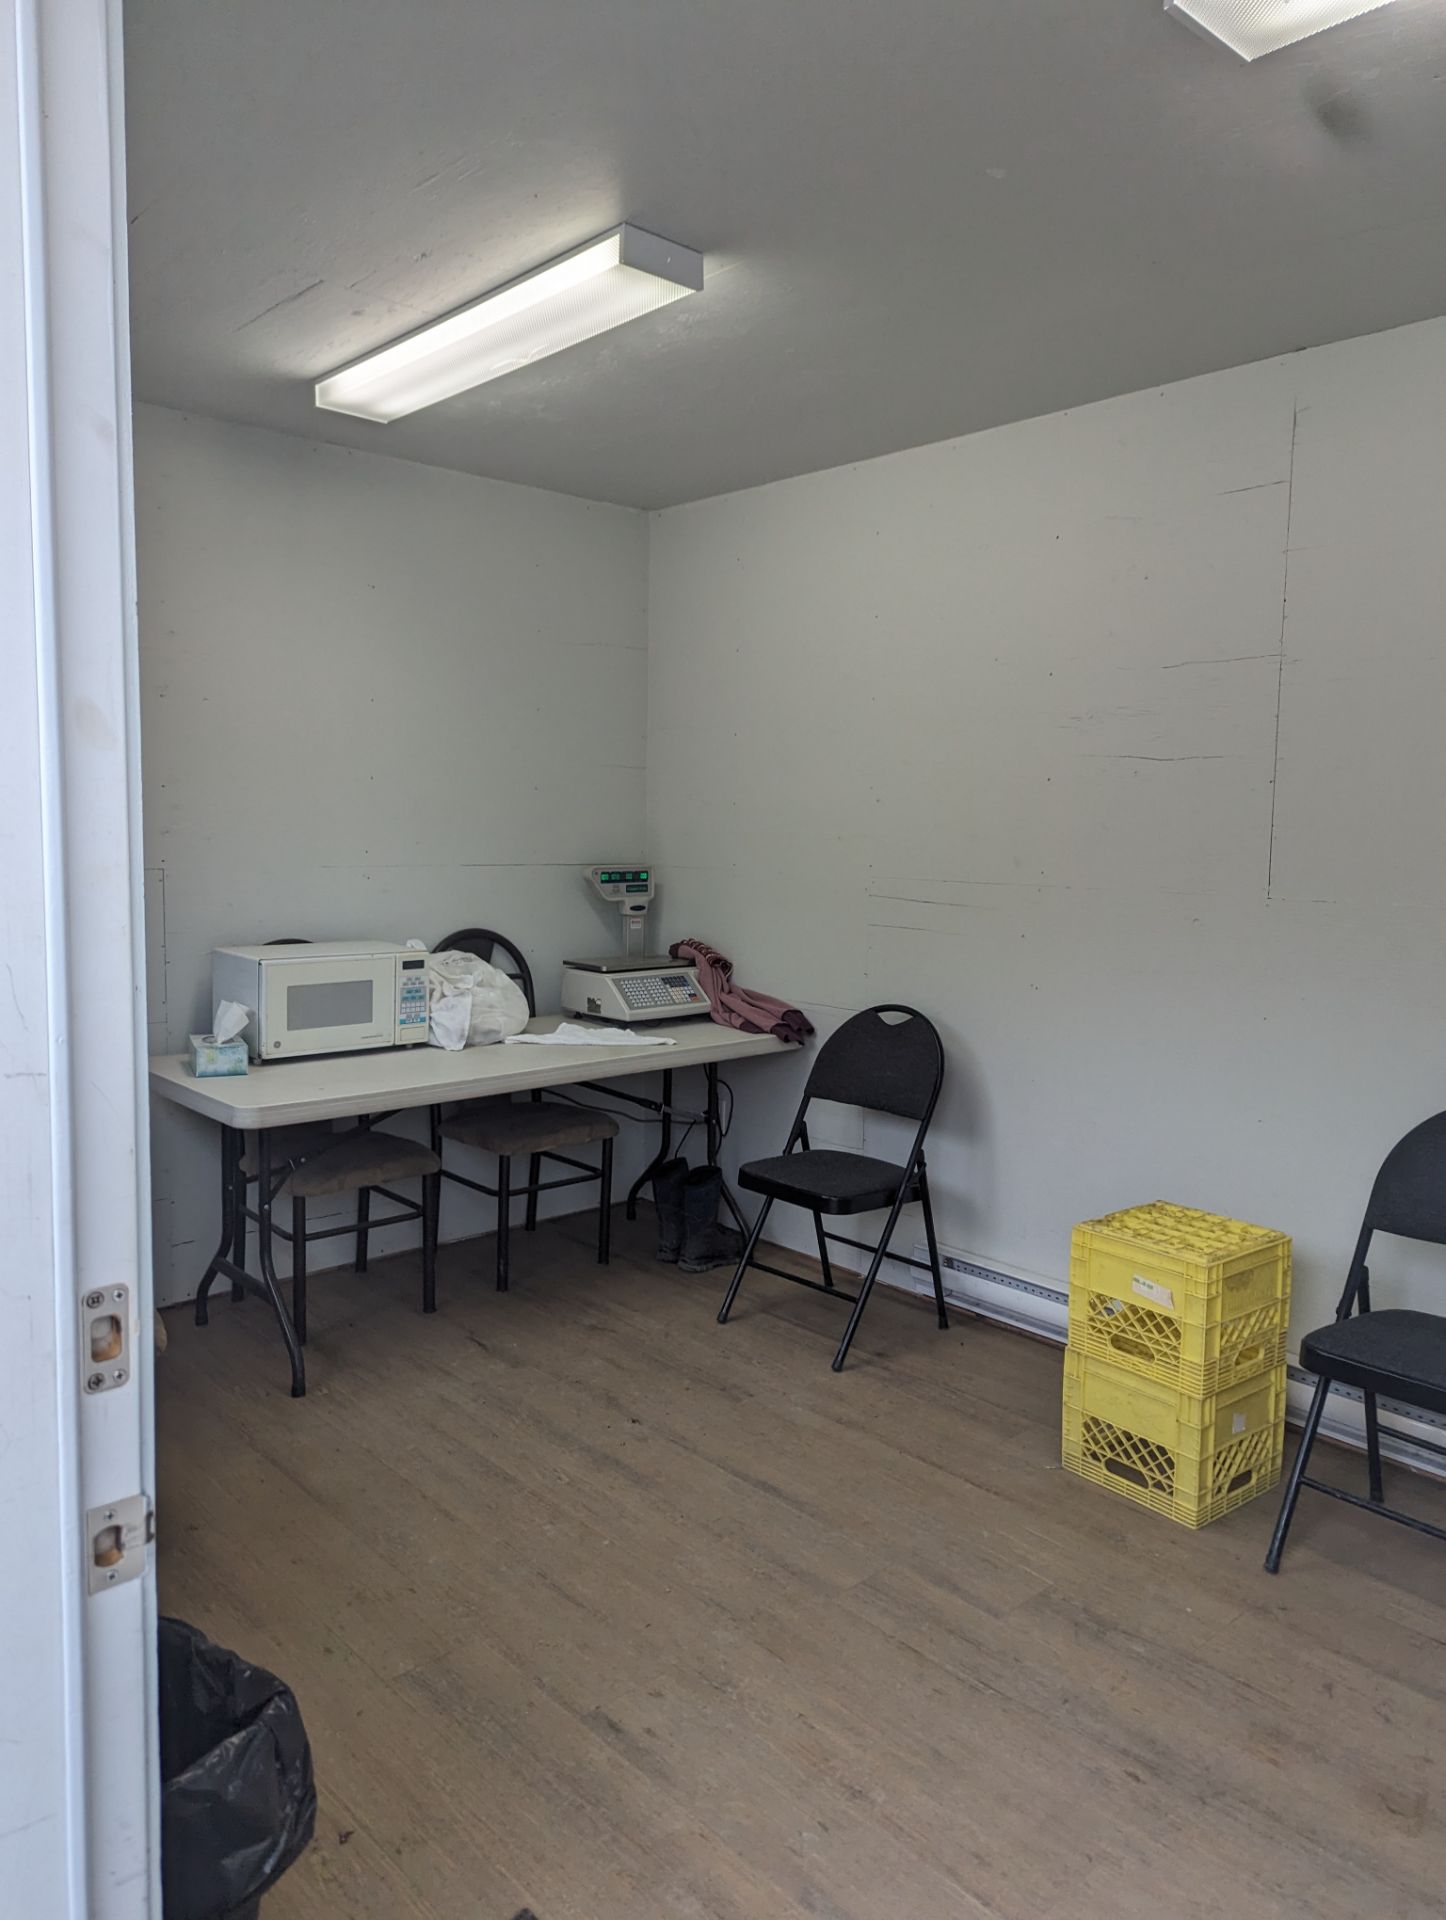 Portable Office Building - Image 2 of 3